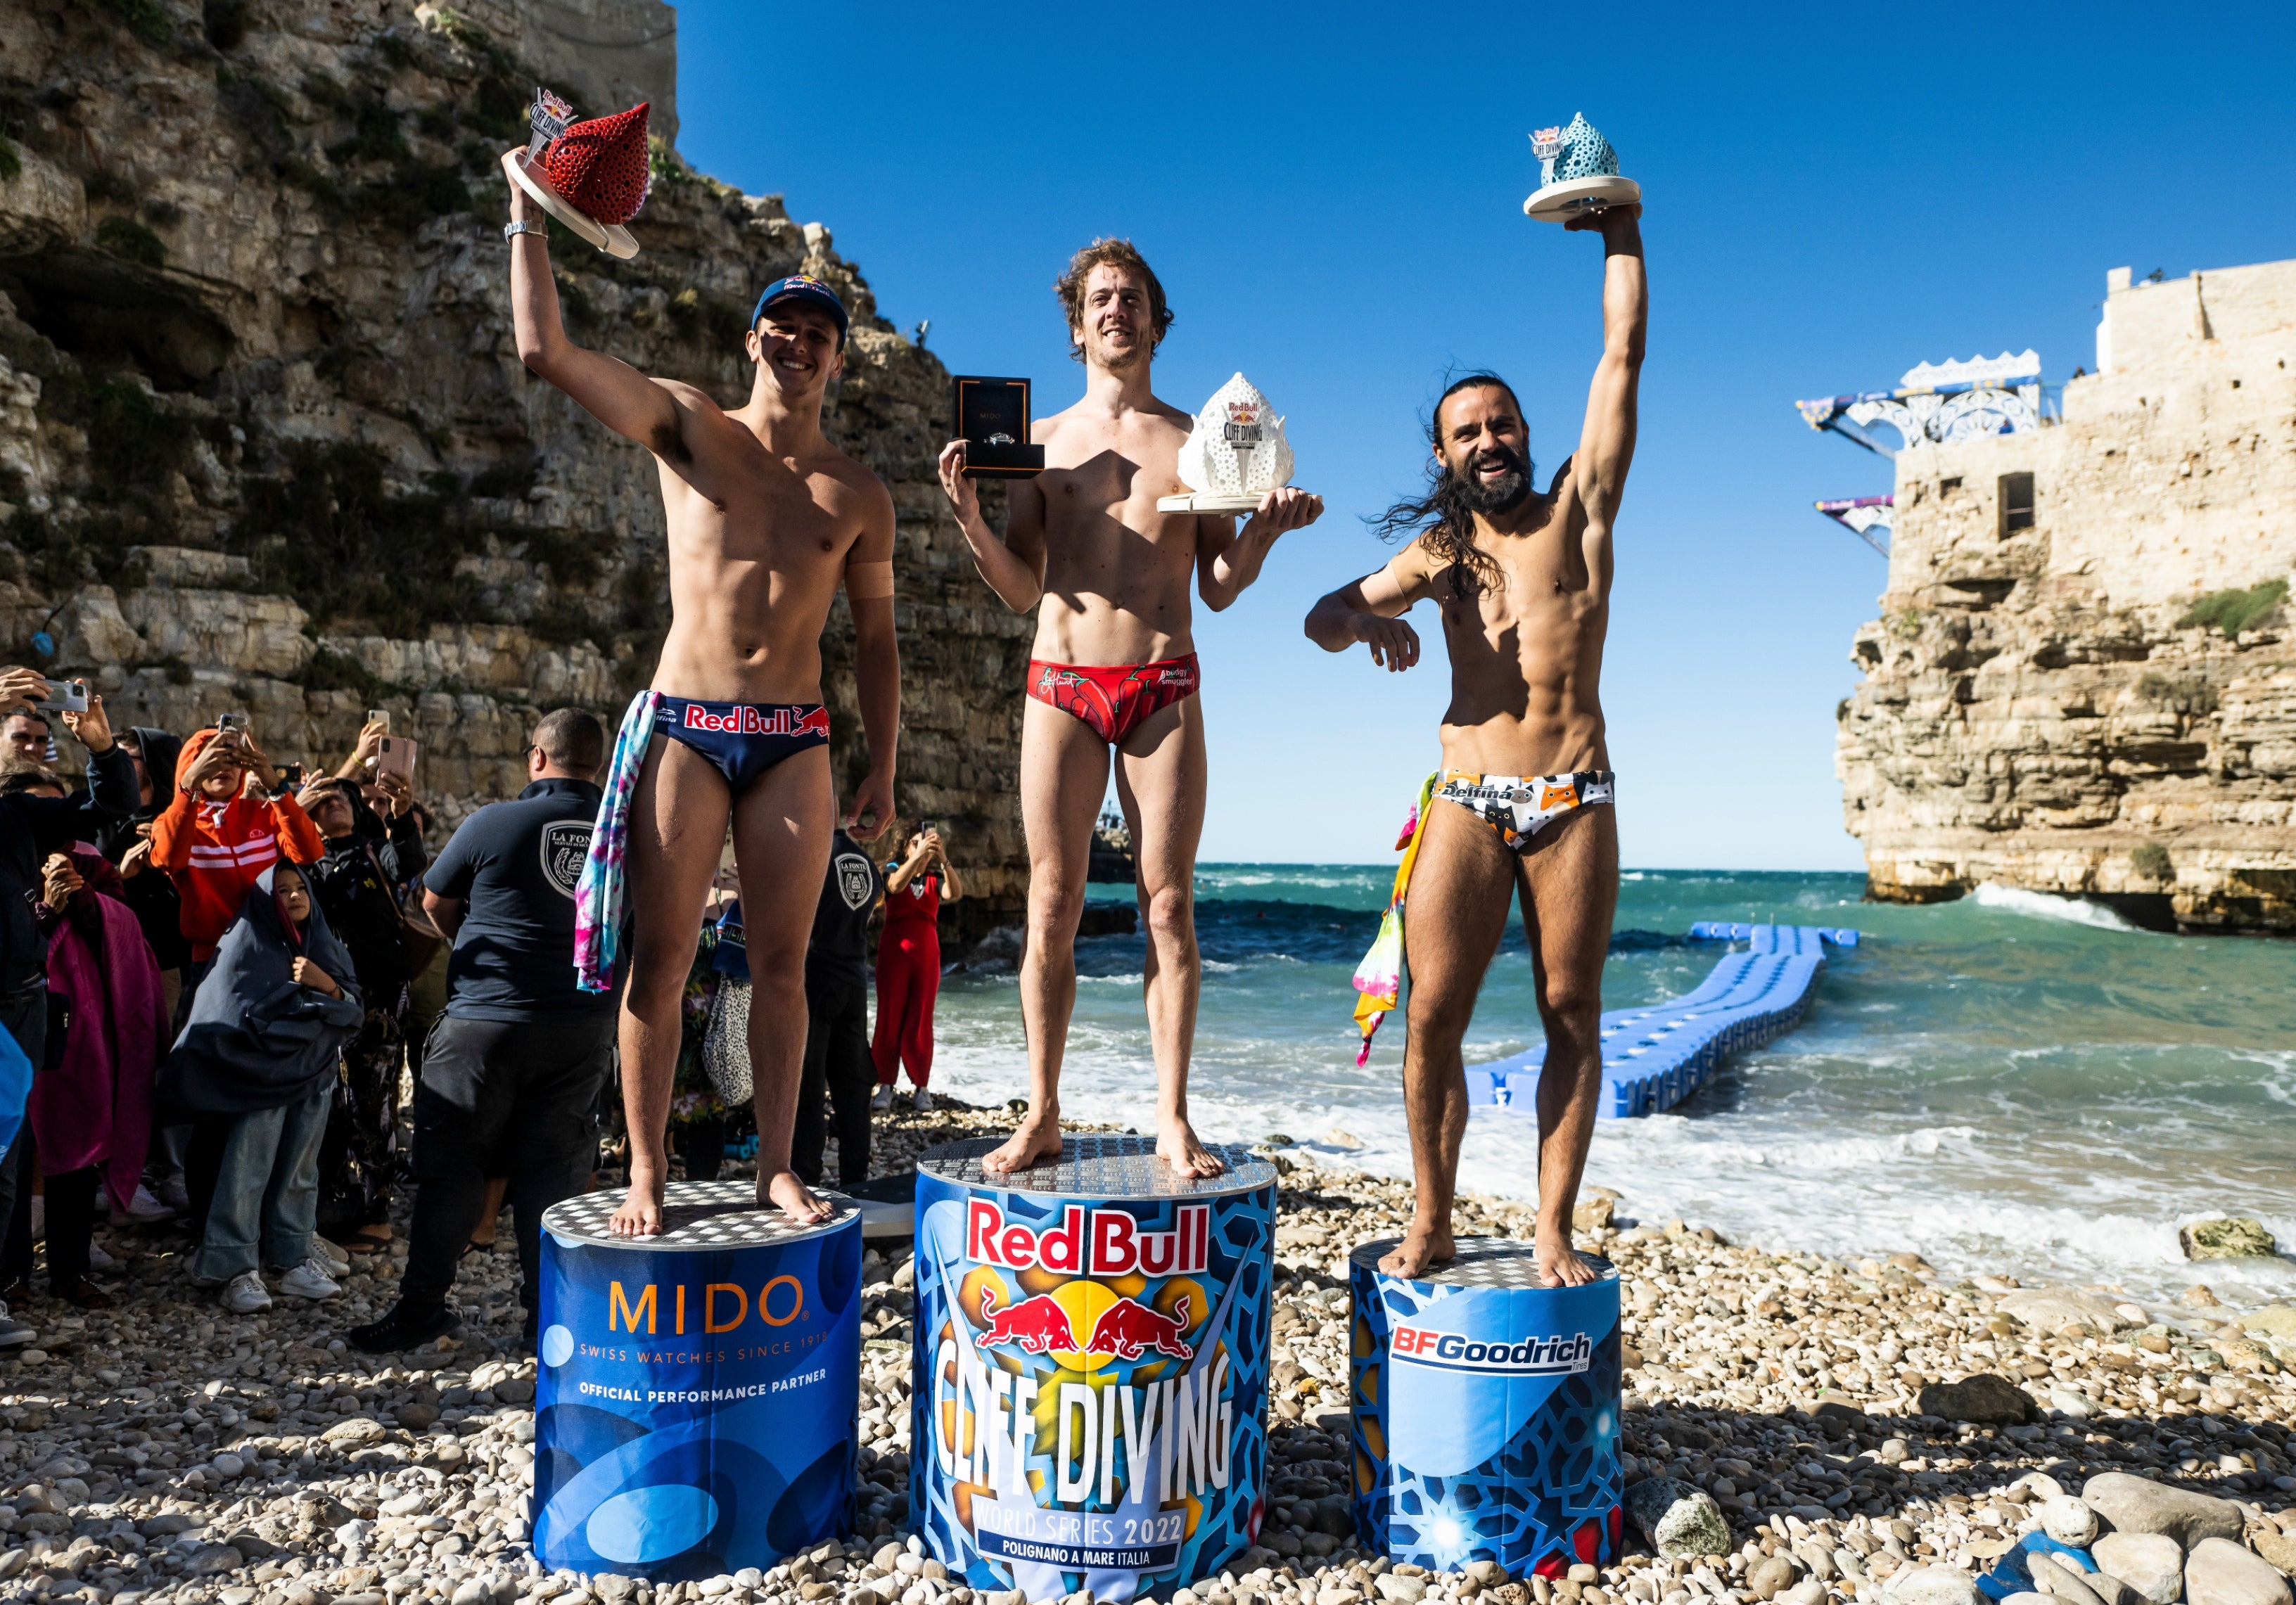 syreindhold Appel til at være attraktiv Parat Briton 'on top of the world' to come second in global cliff diving event |  The Independent